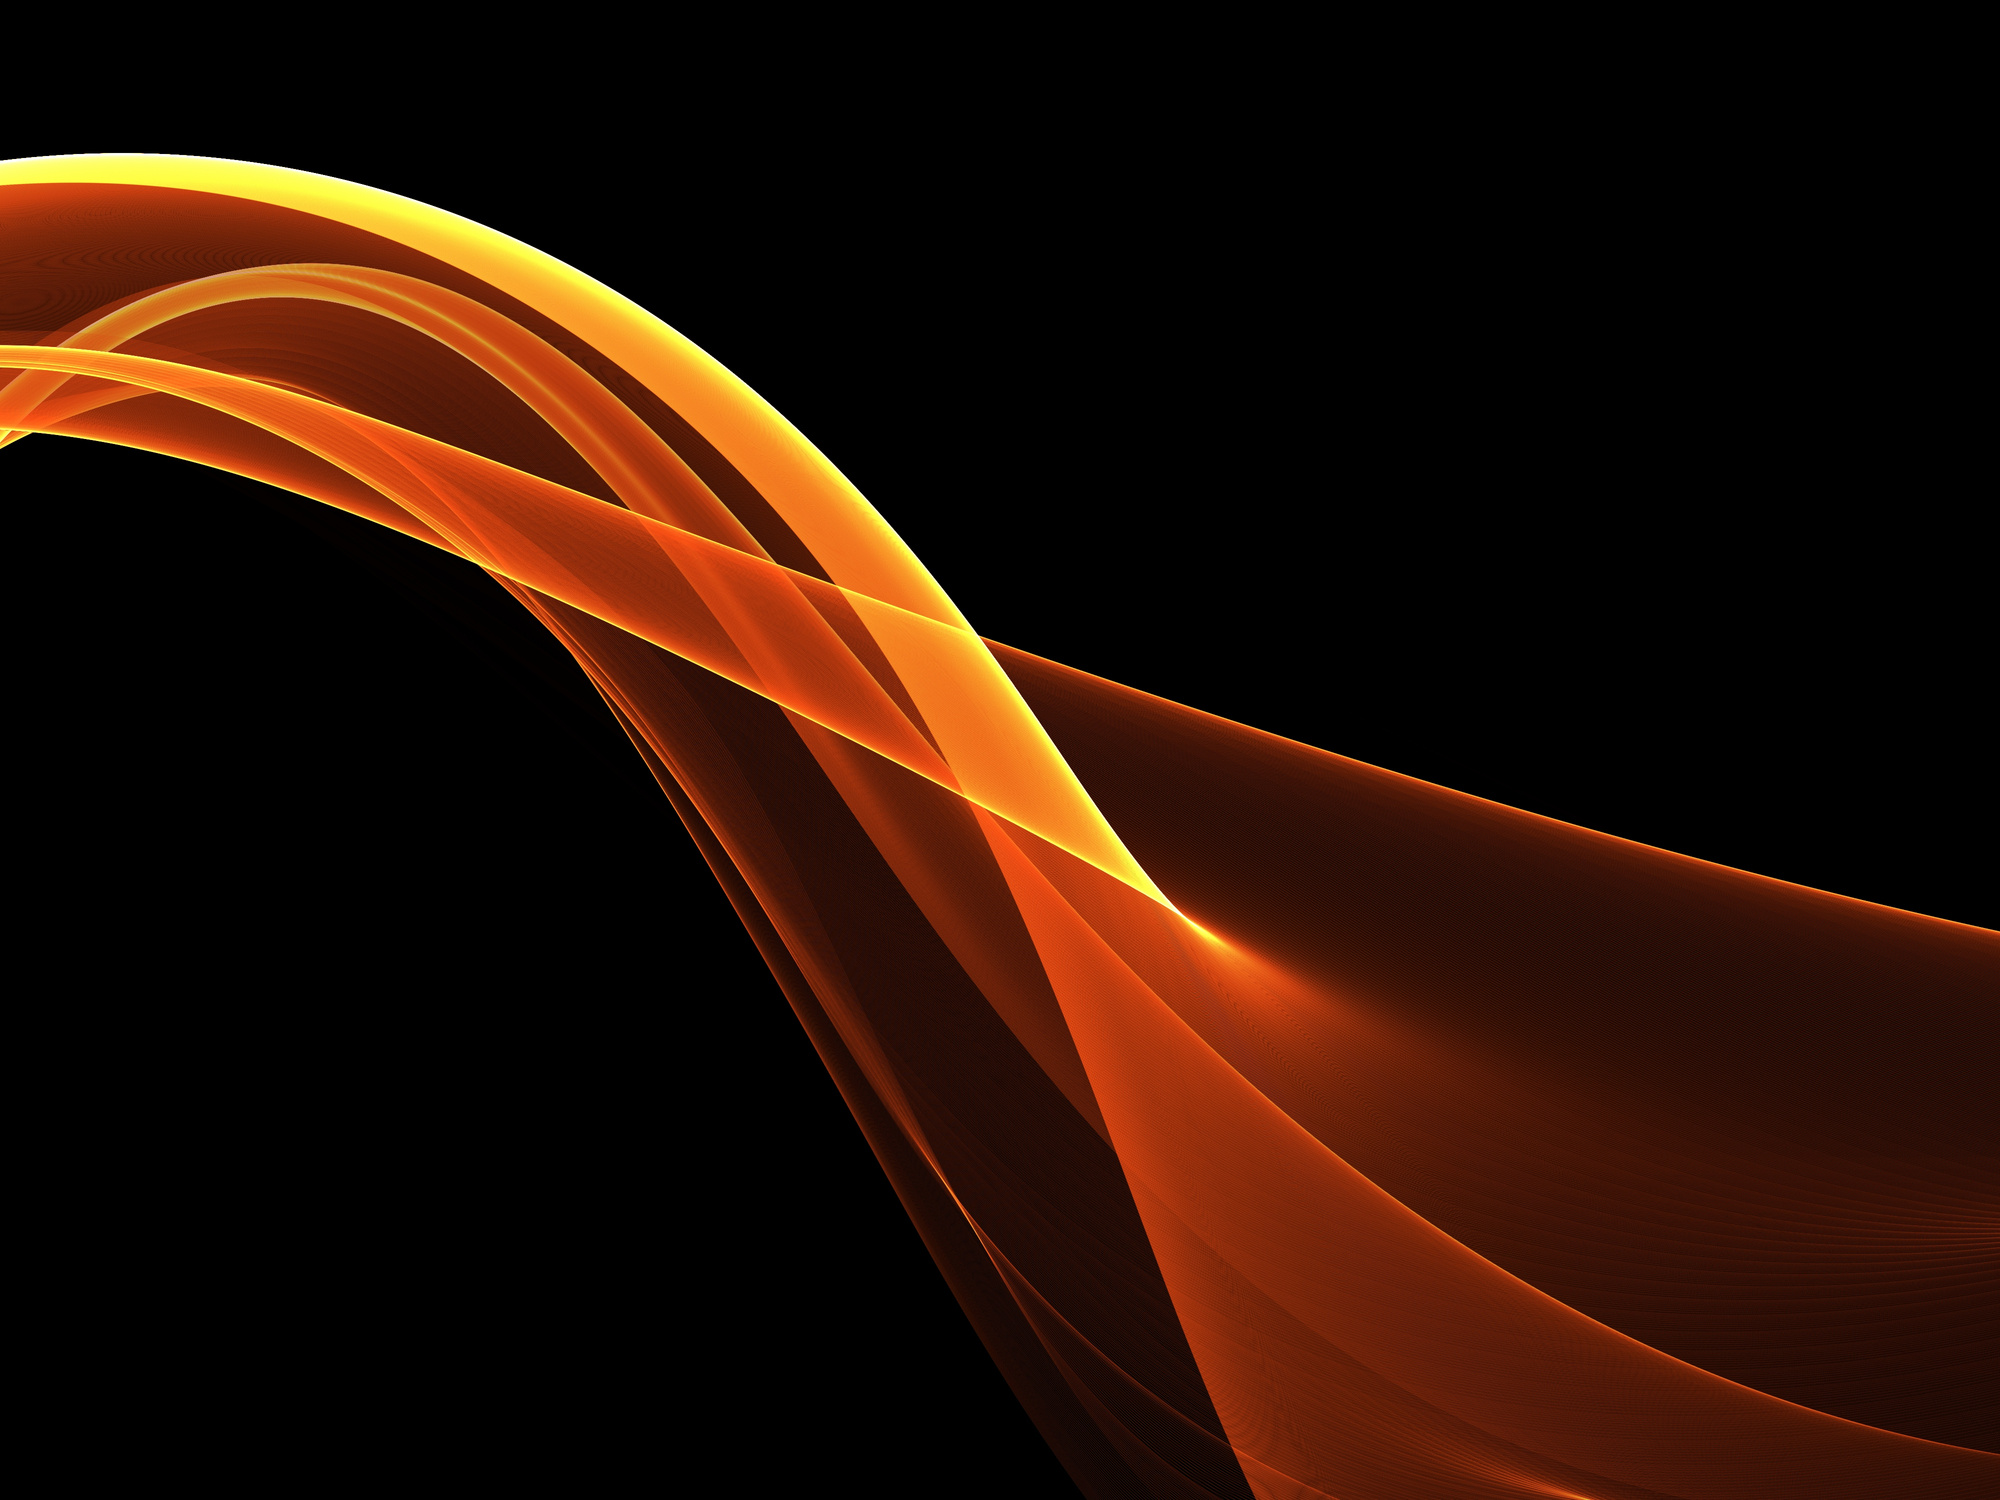 Abstract wave orange and black background